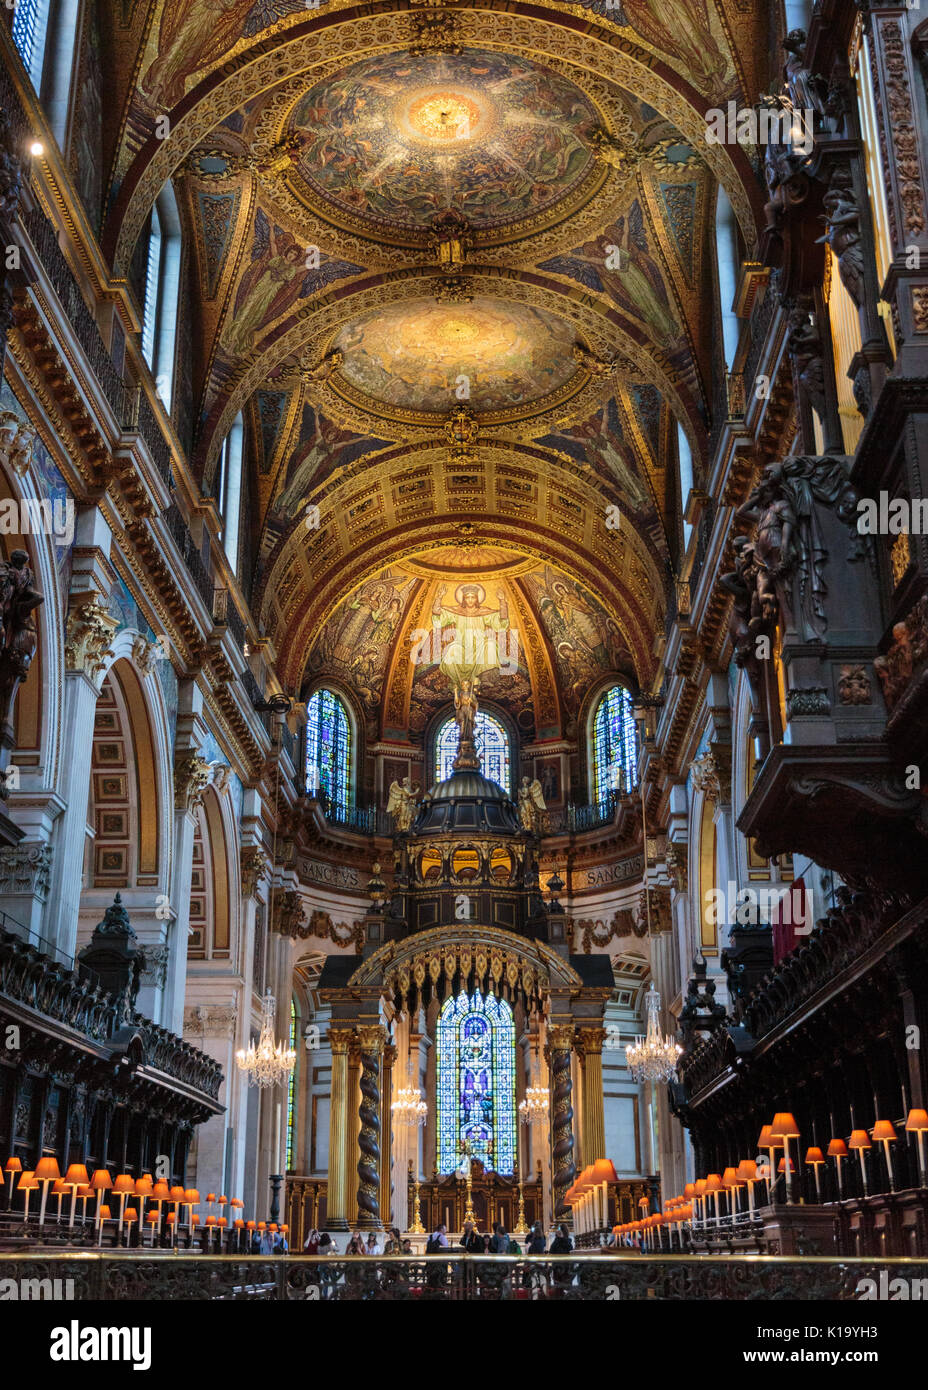 St Paul's Cathedral interior, view from the quire and choir stalls towards the High Altar and ceiling, London UK Stock Photo